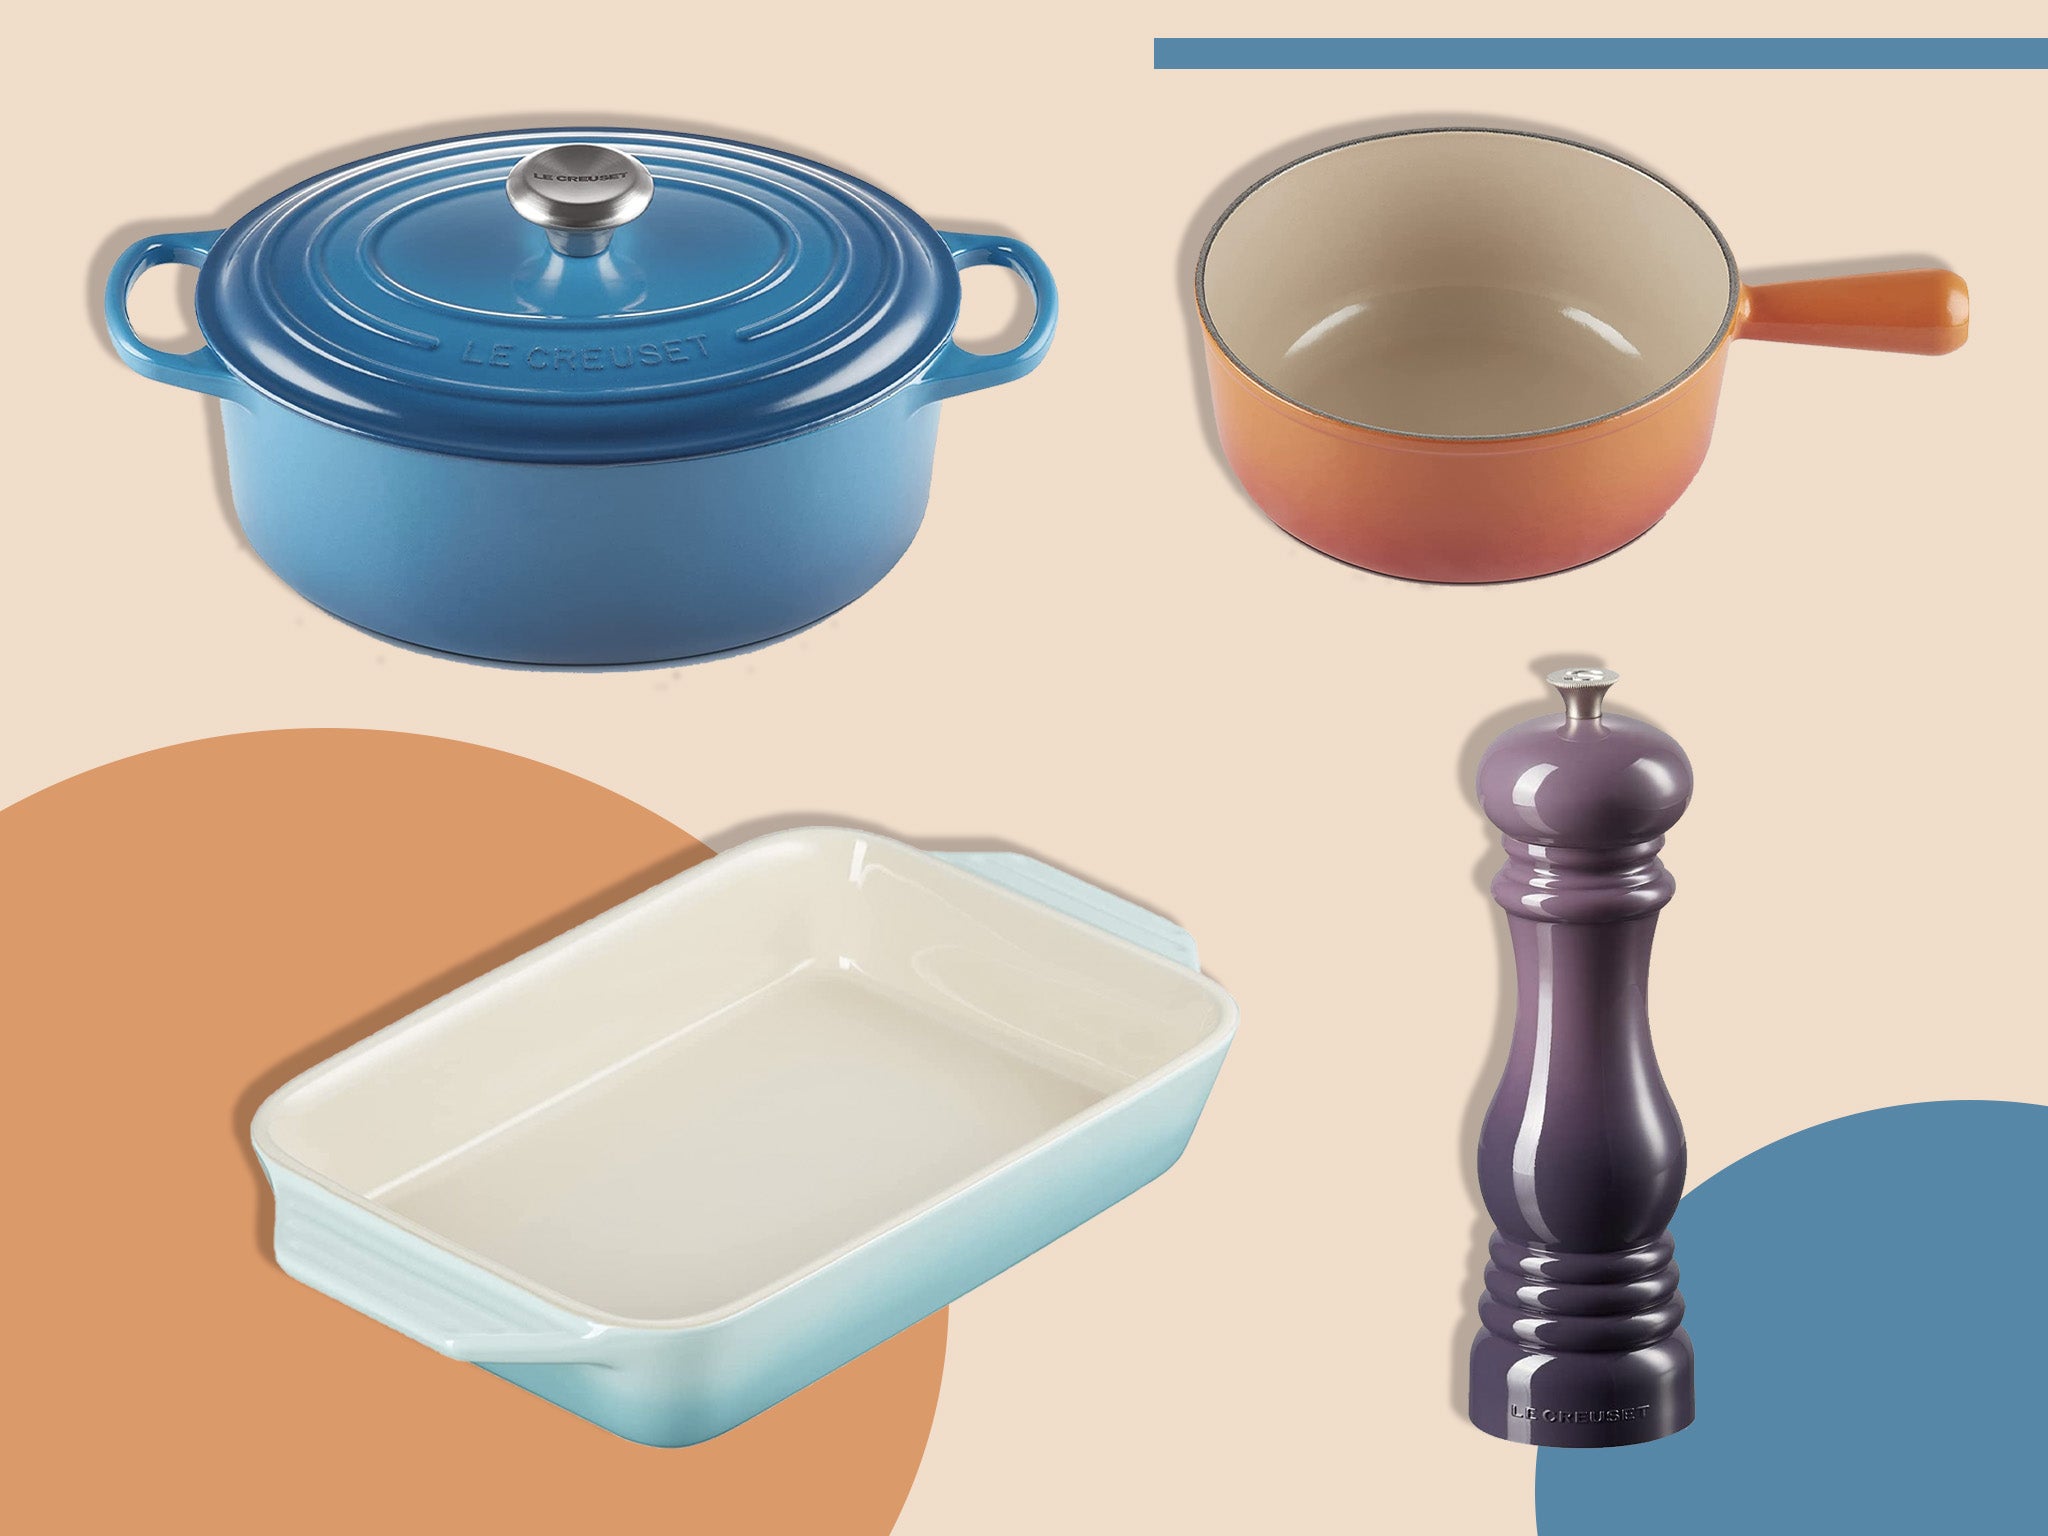 Everyone from home cooks to pro chefs just can’t get enough of the cookware